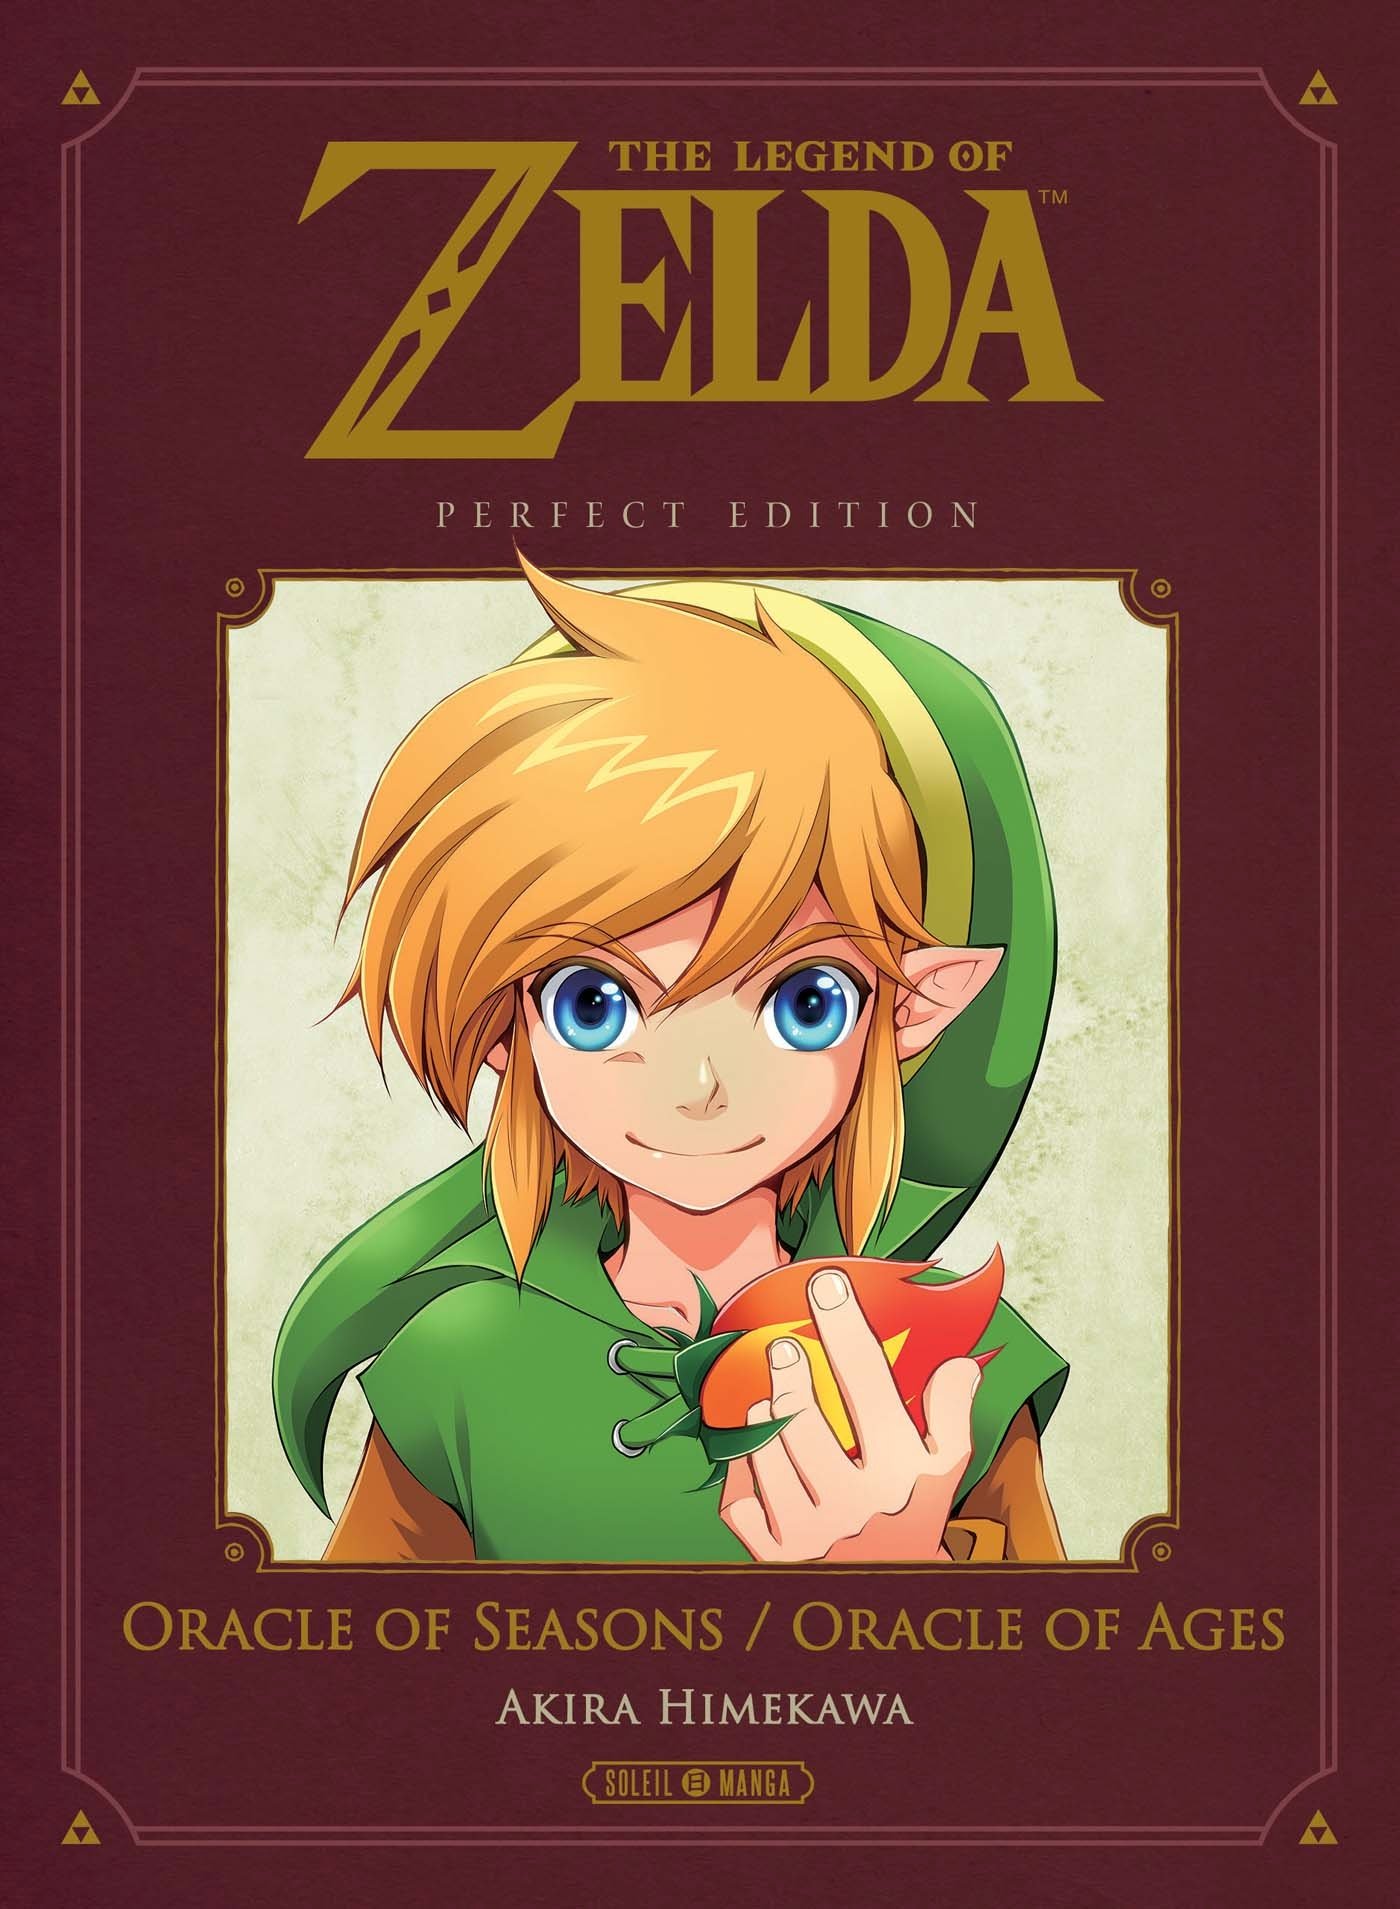 The Legend of Zelda - Oracles of seasons & Ages - Perfect Edition